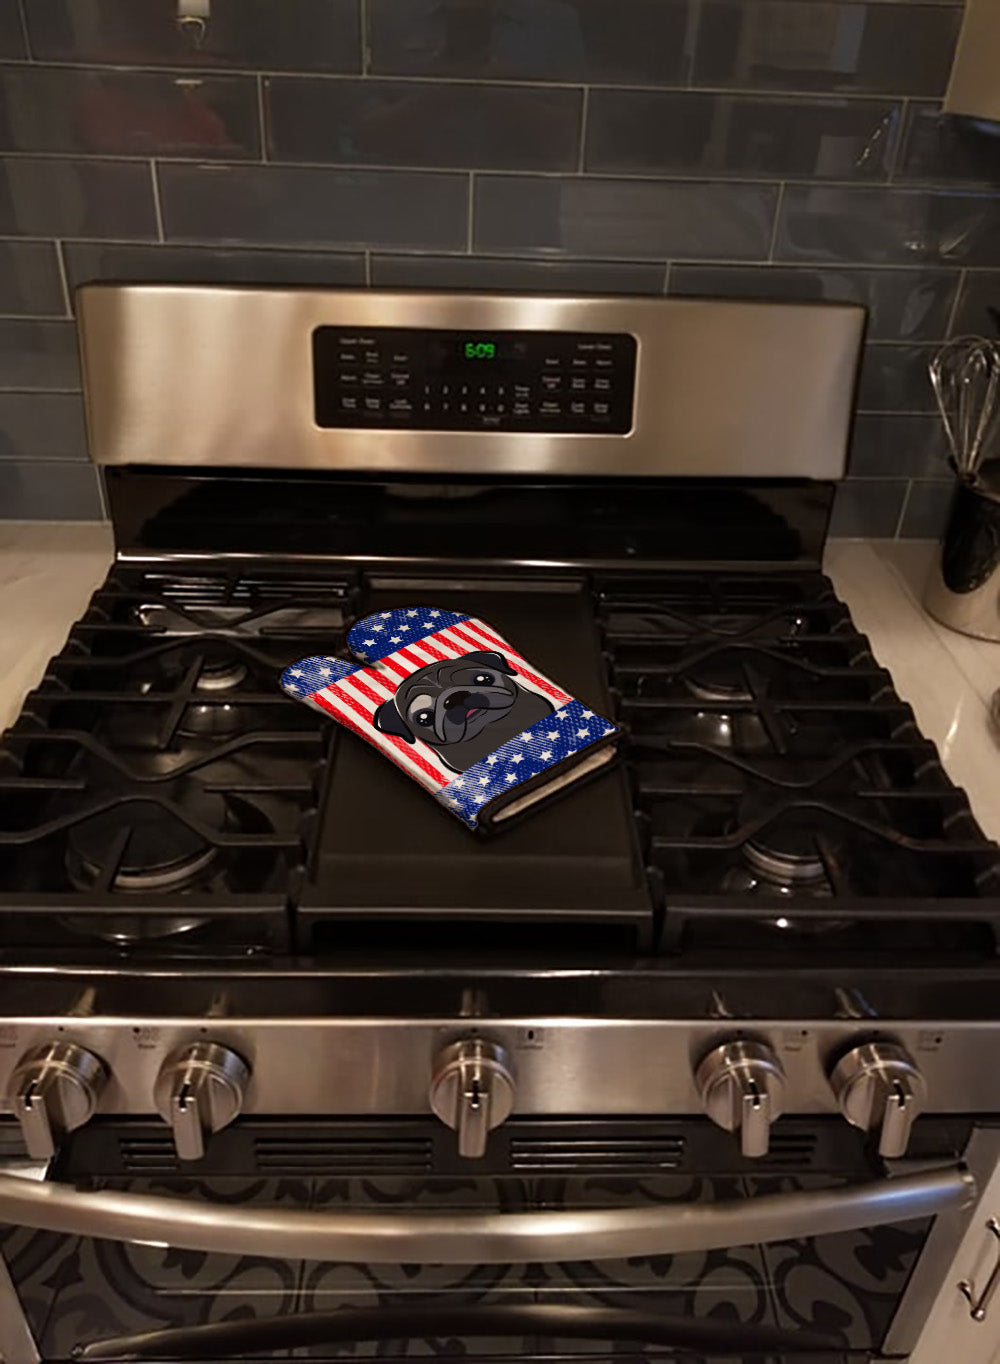 American Flag and Black Pug Oven Mitt BB2193OVMT  the-store.com.